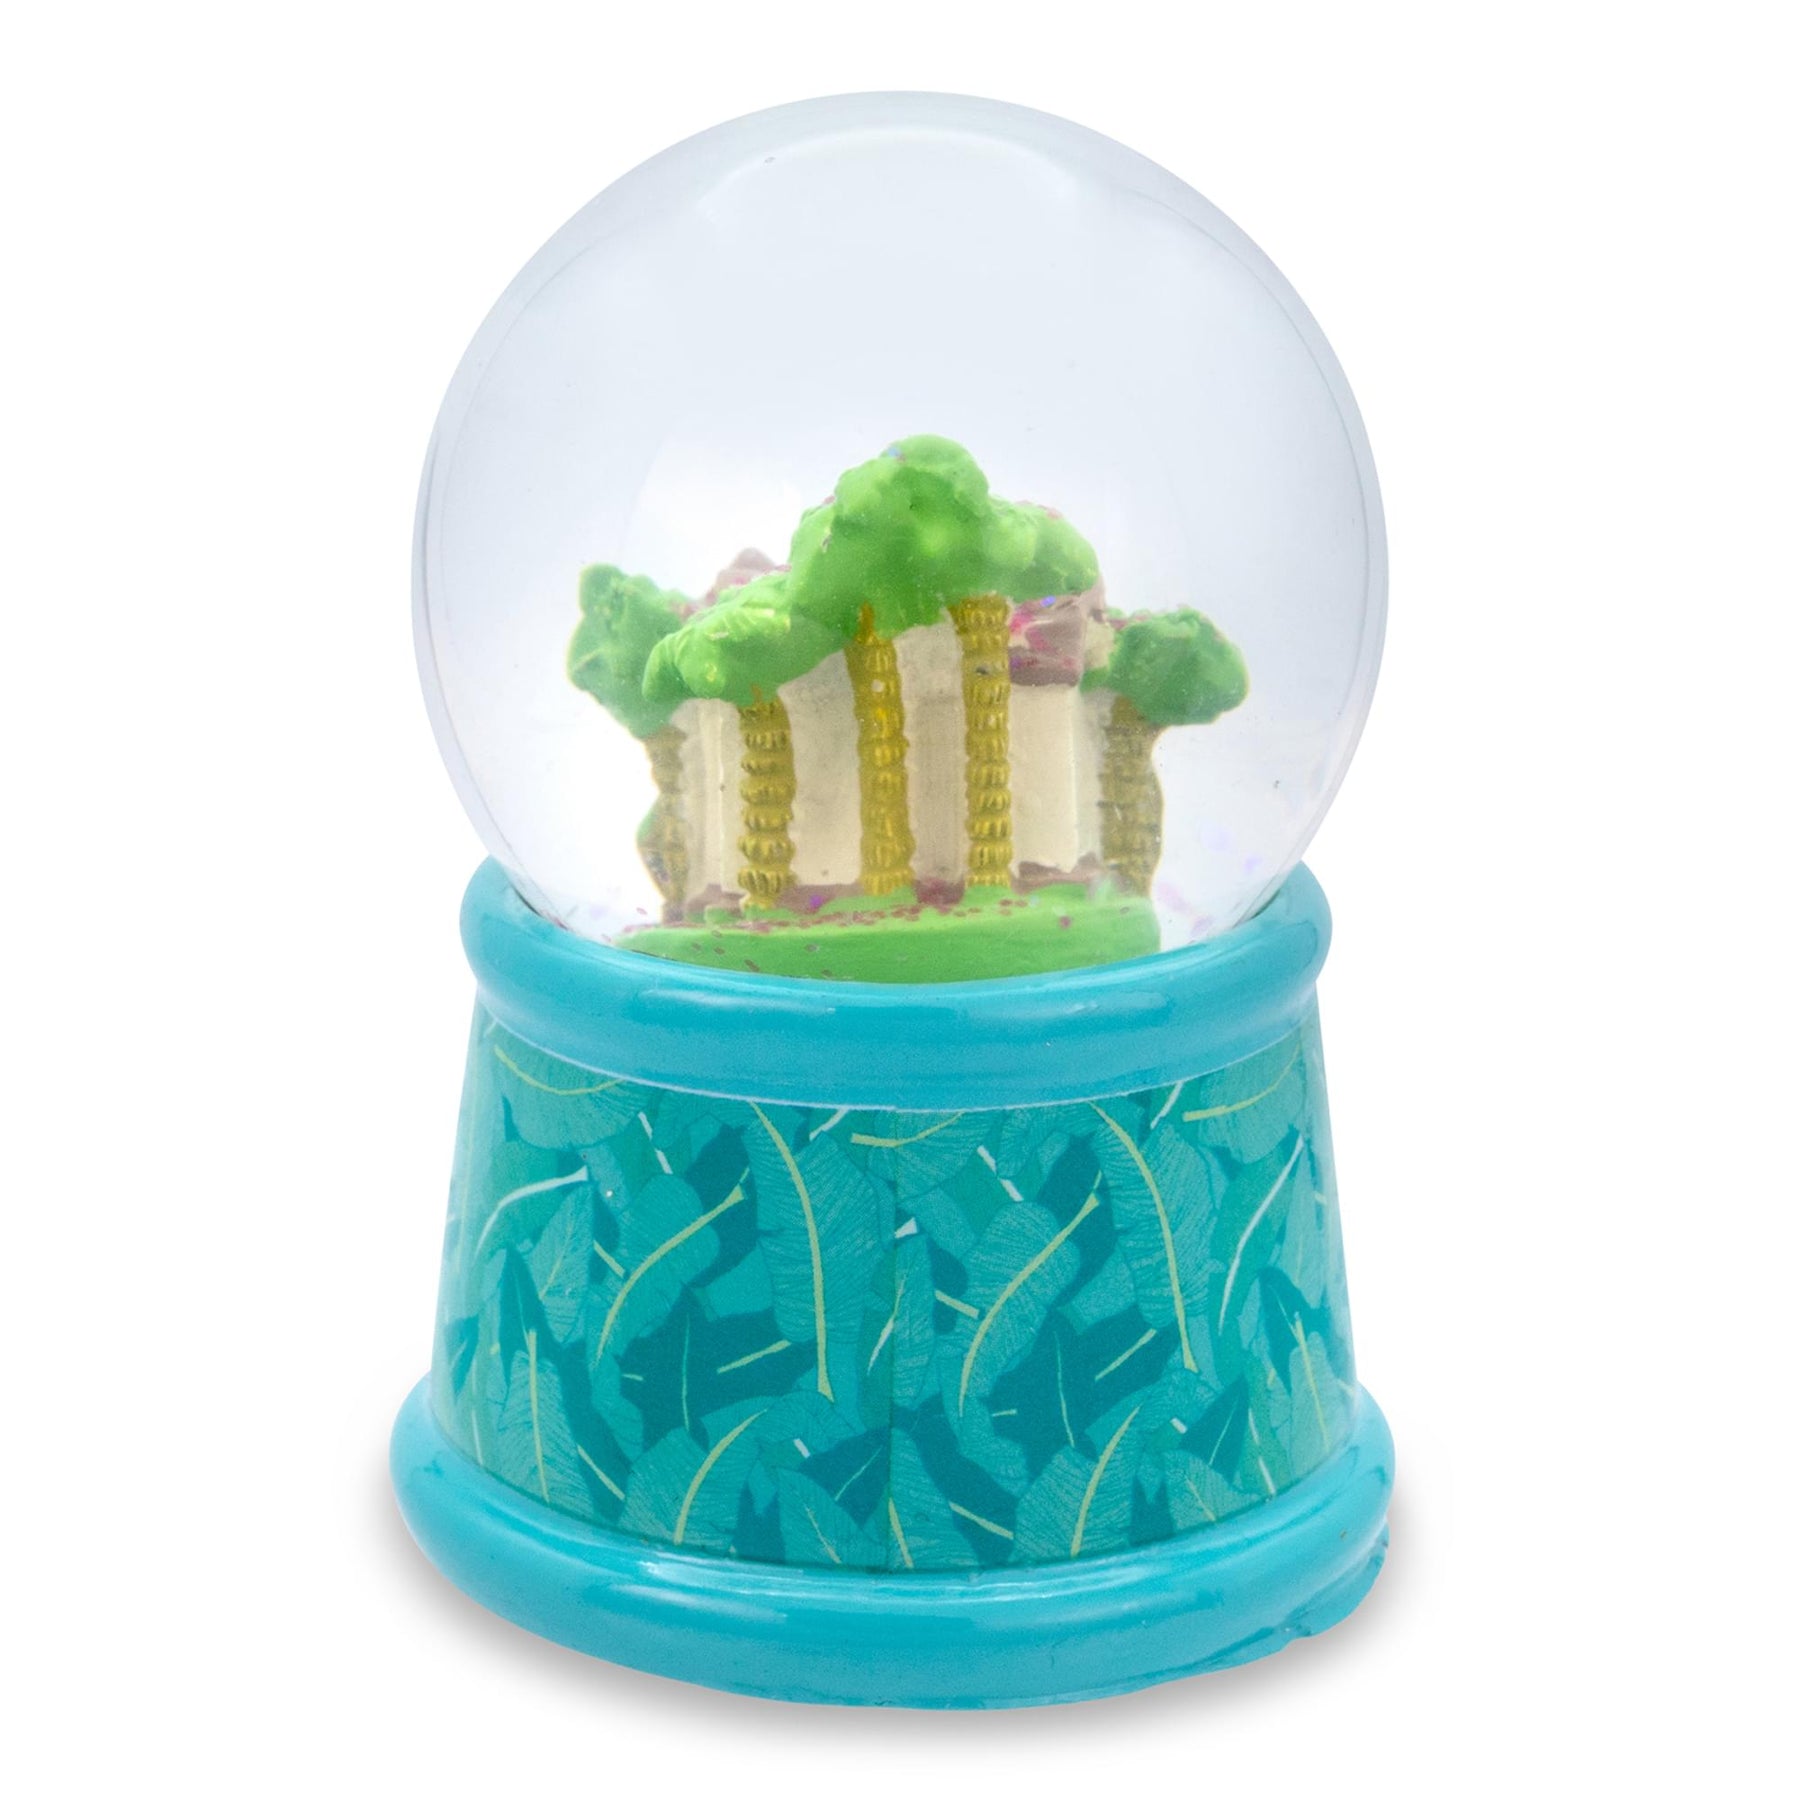 The Golden Girls Shady Pines Light-Up Mini Snow Globe | 2 Inches Tall